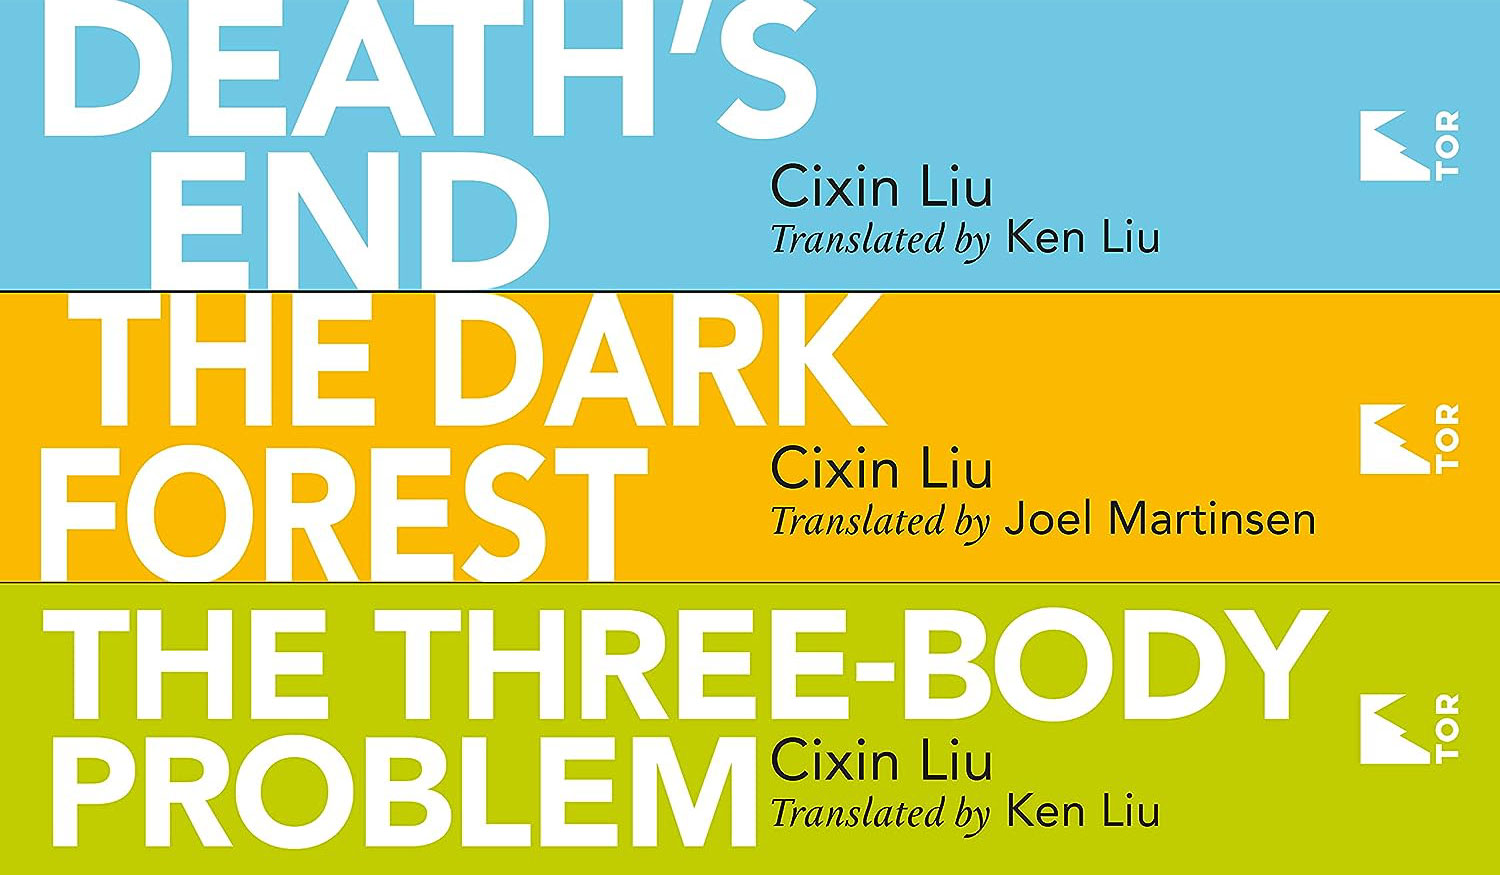 Remembrance of Earth's Past" trilogy by Liu Cixin